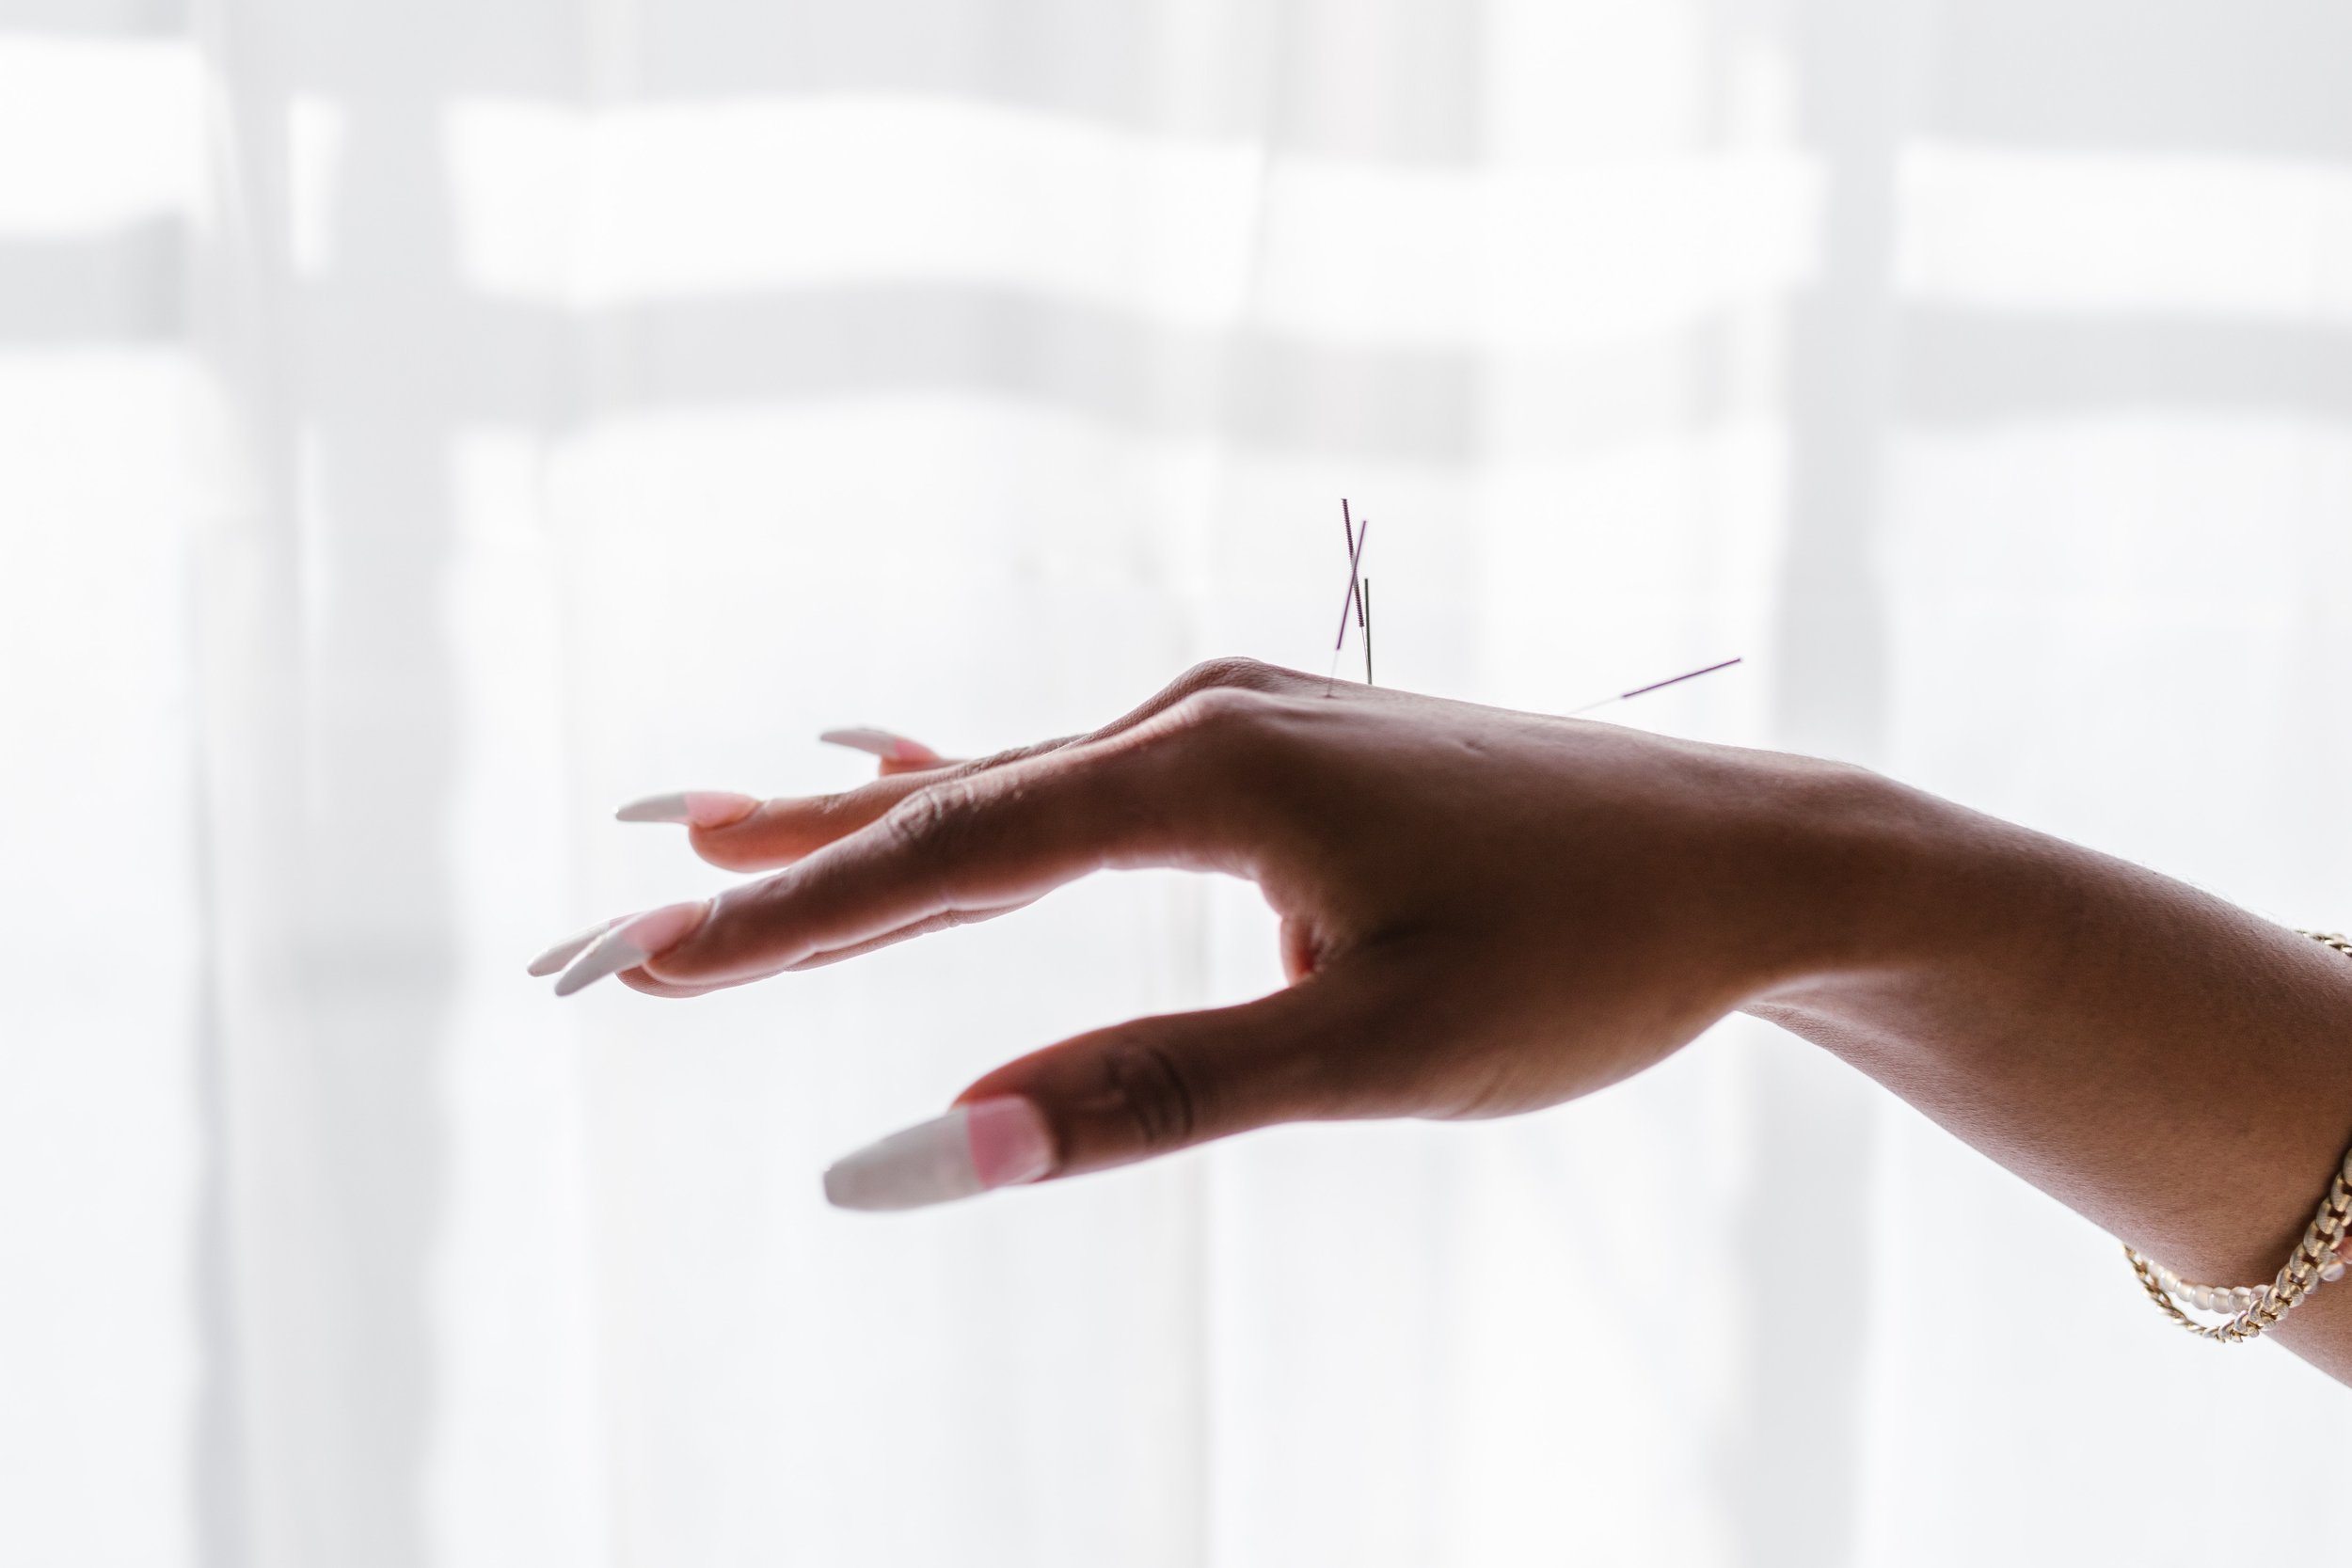 A close up of a woman's hand with acupuncture needles in it. (Copy)